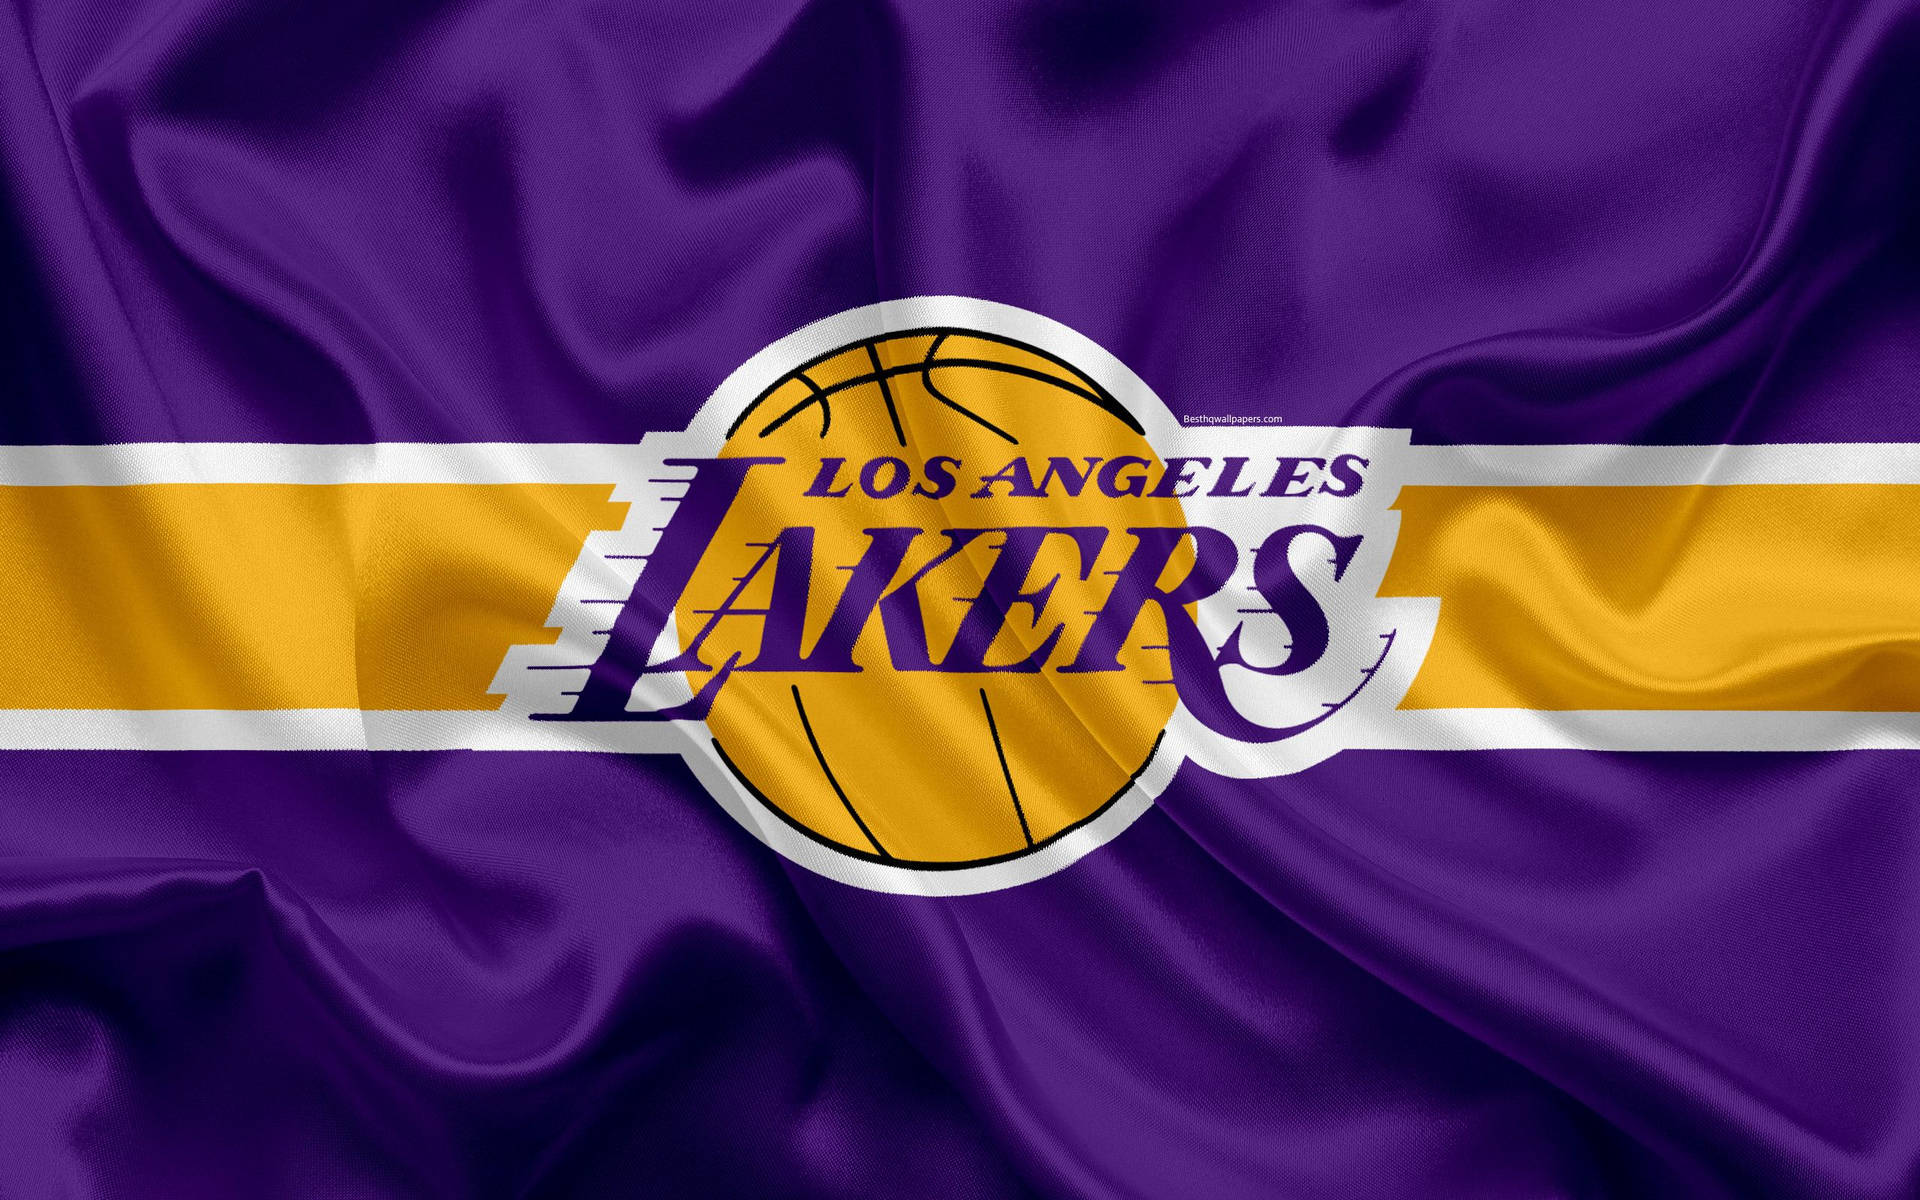 August 29, 2020 - Los Angeles Lakers Championship Parade and Celebration Wallpaper